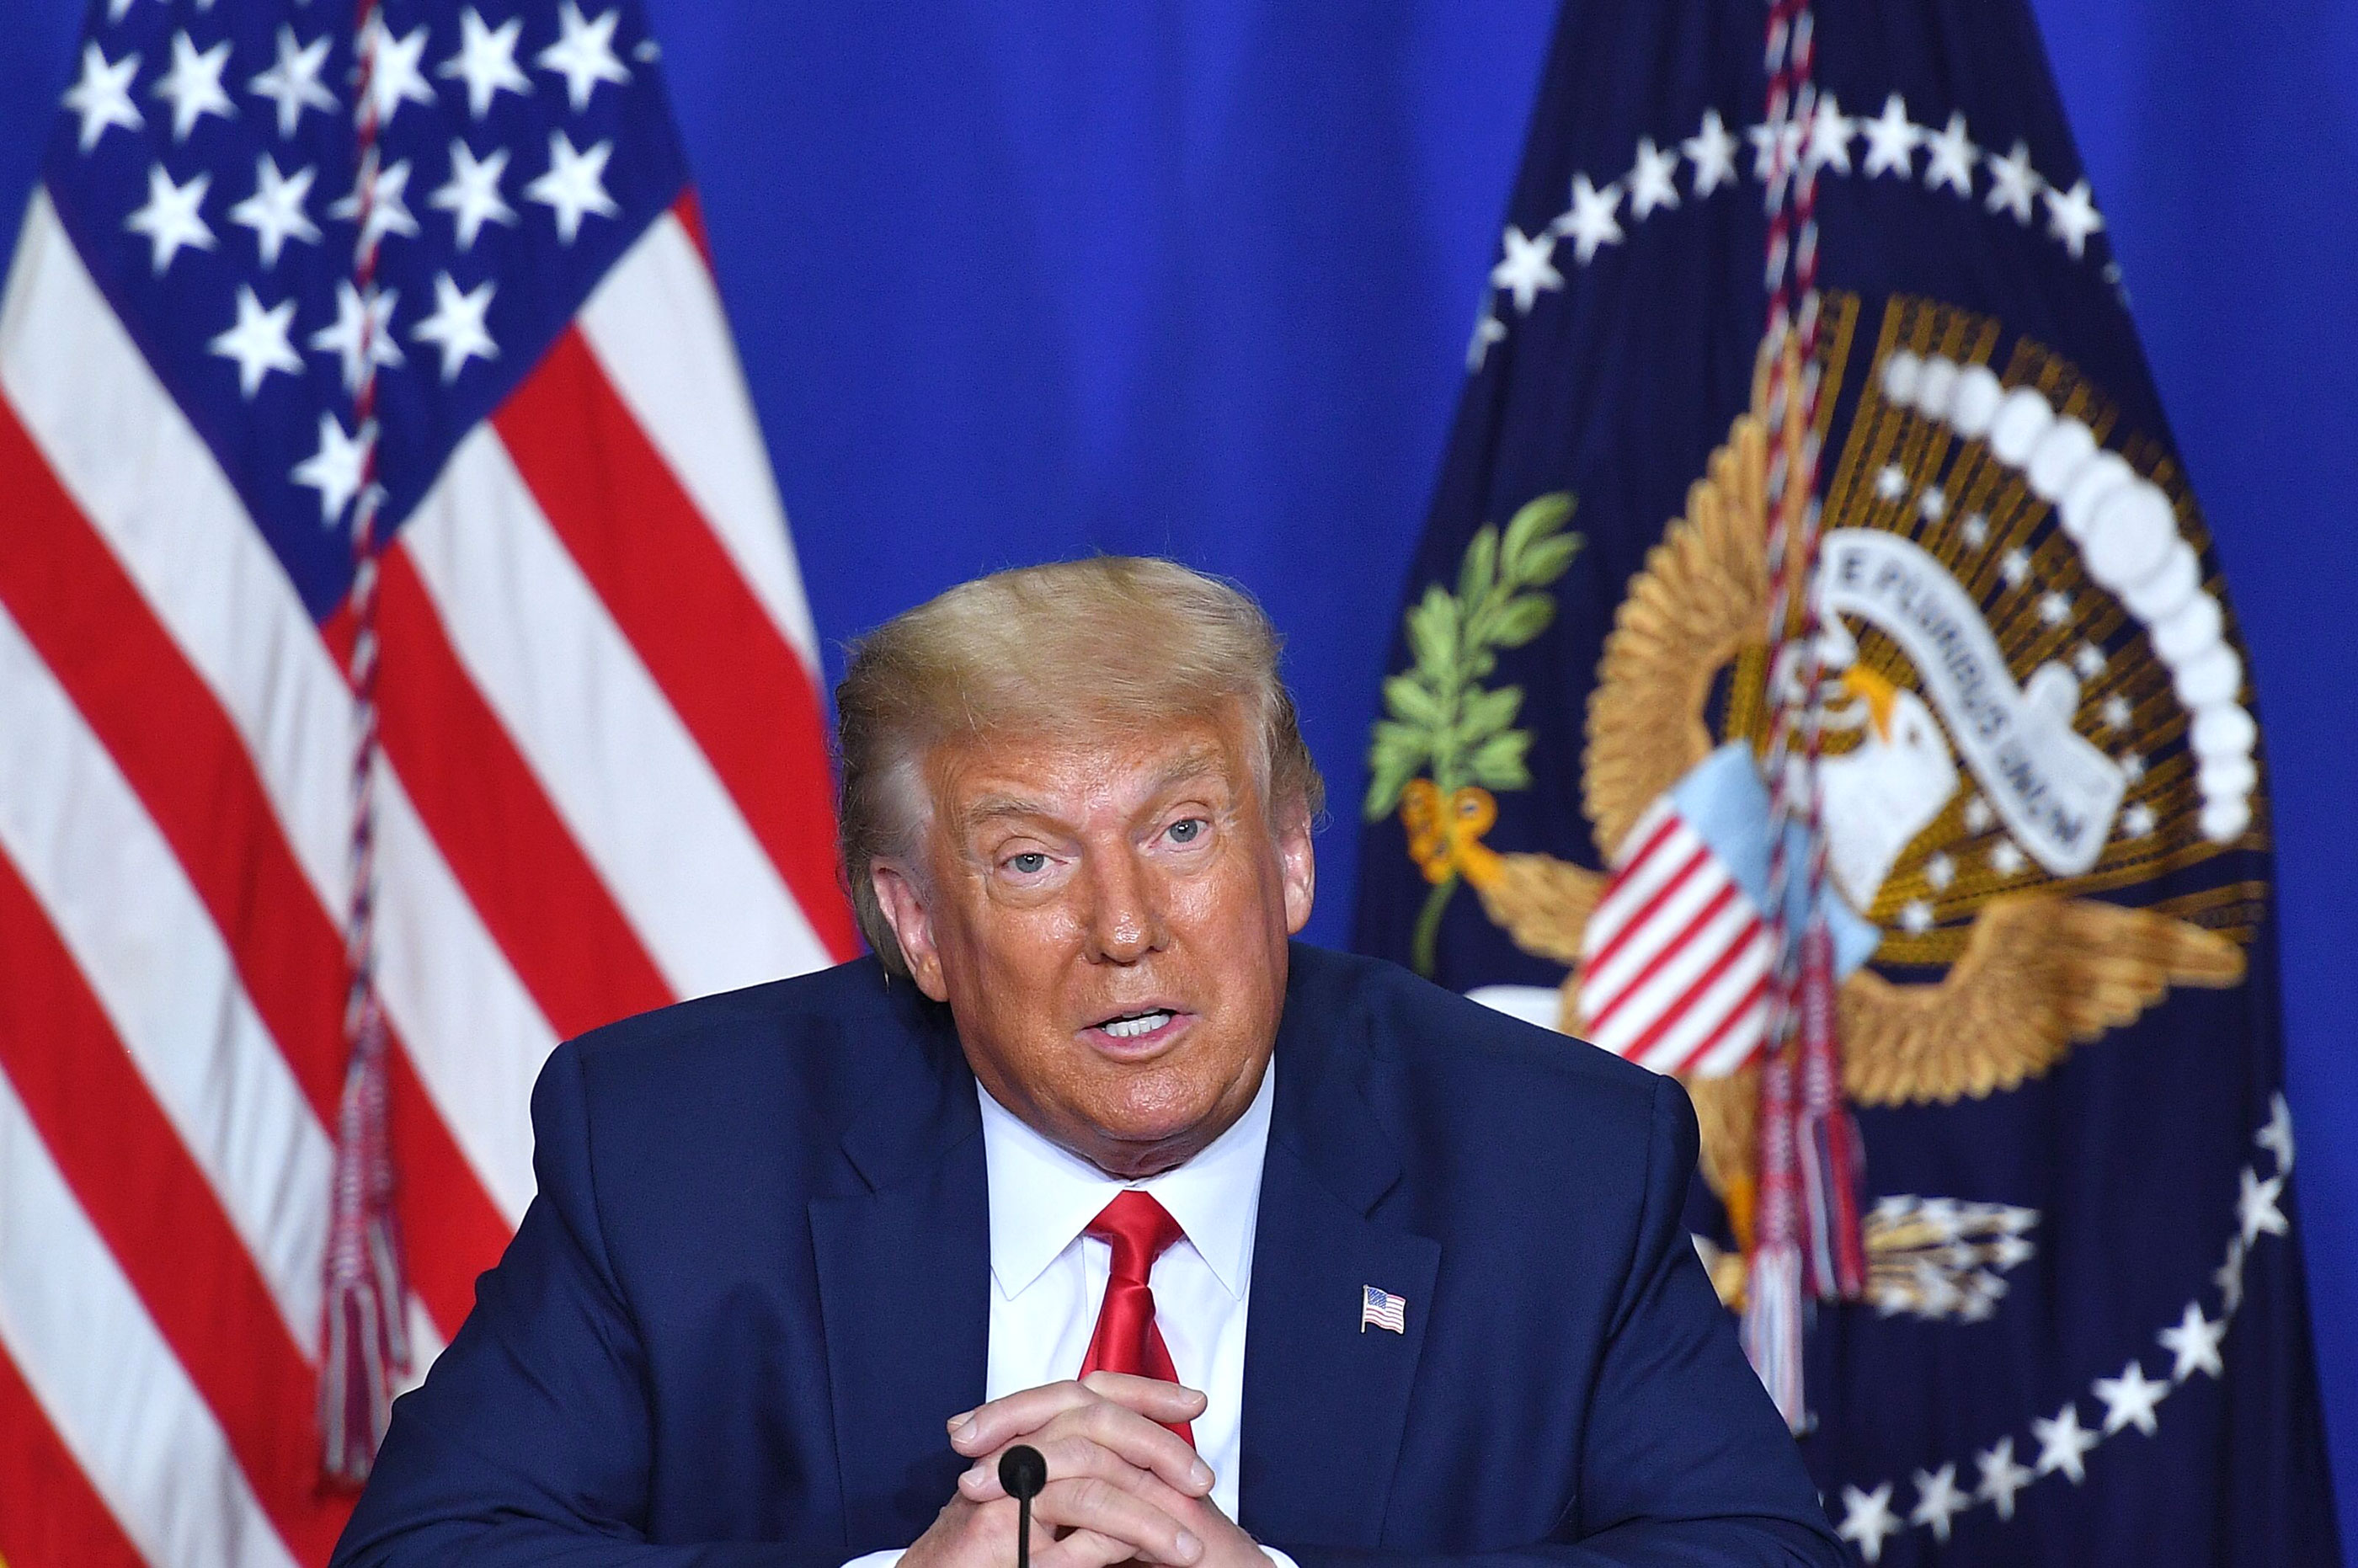 President Donald Trump speaks during a roundtable discussion on community safety on September 1 in Kenosha, Wisconsin.